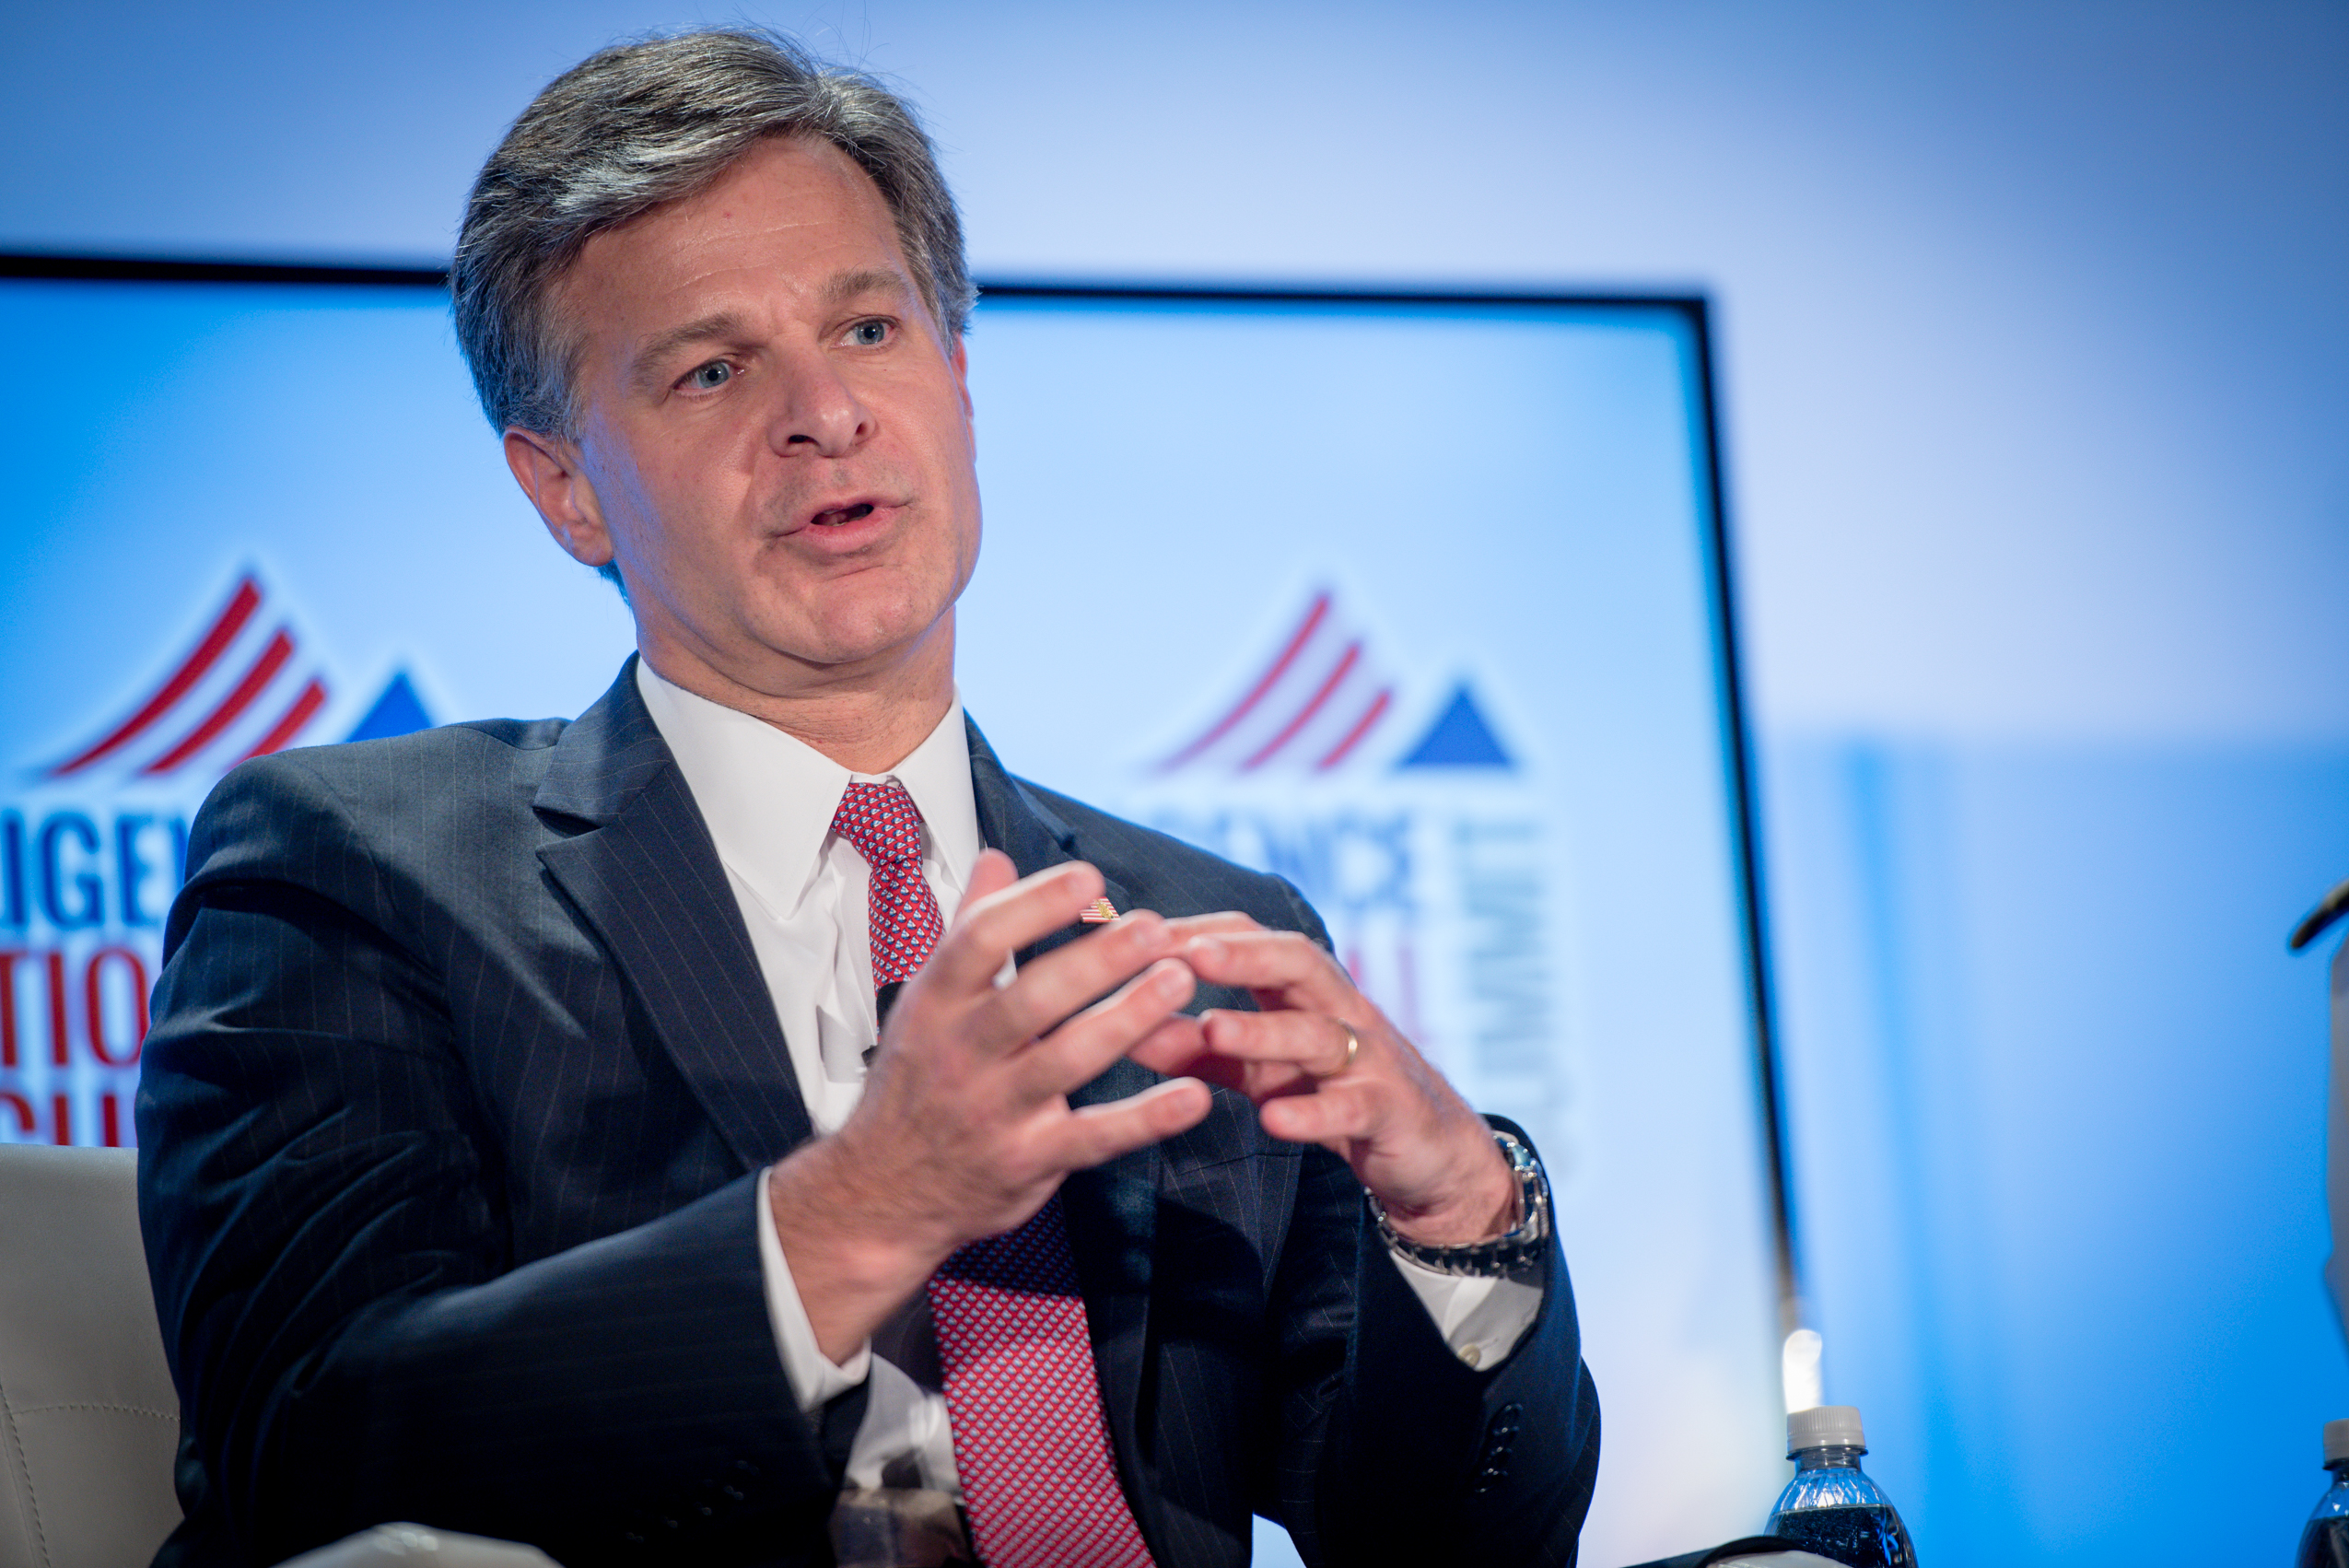 Director Christopher Wray at INSA Summit